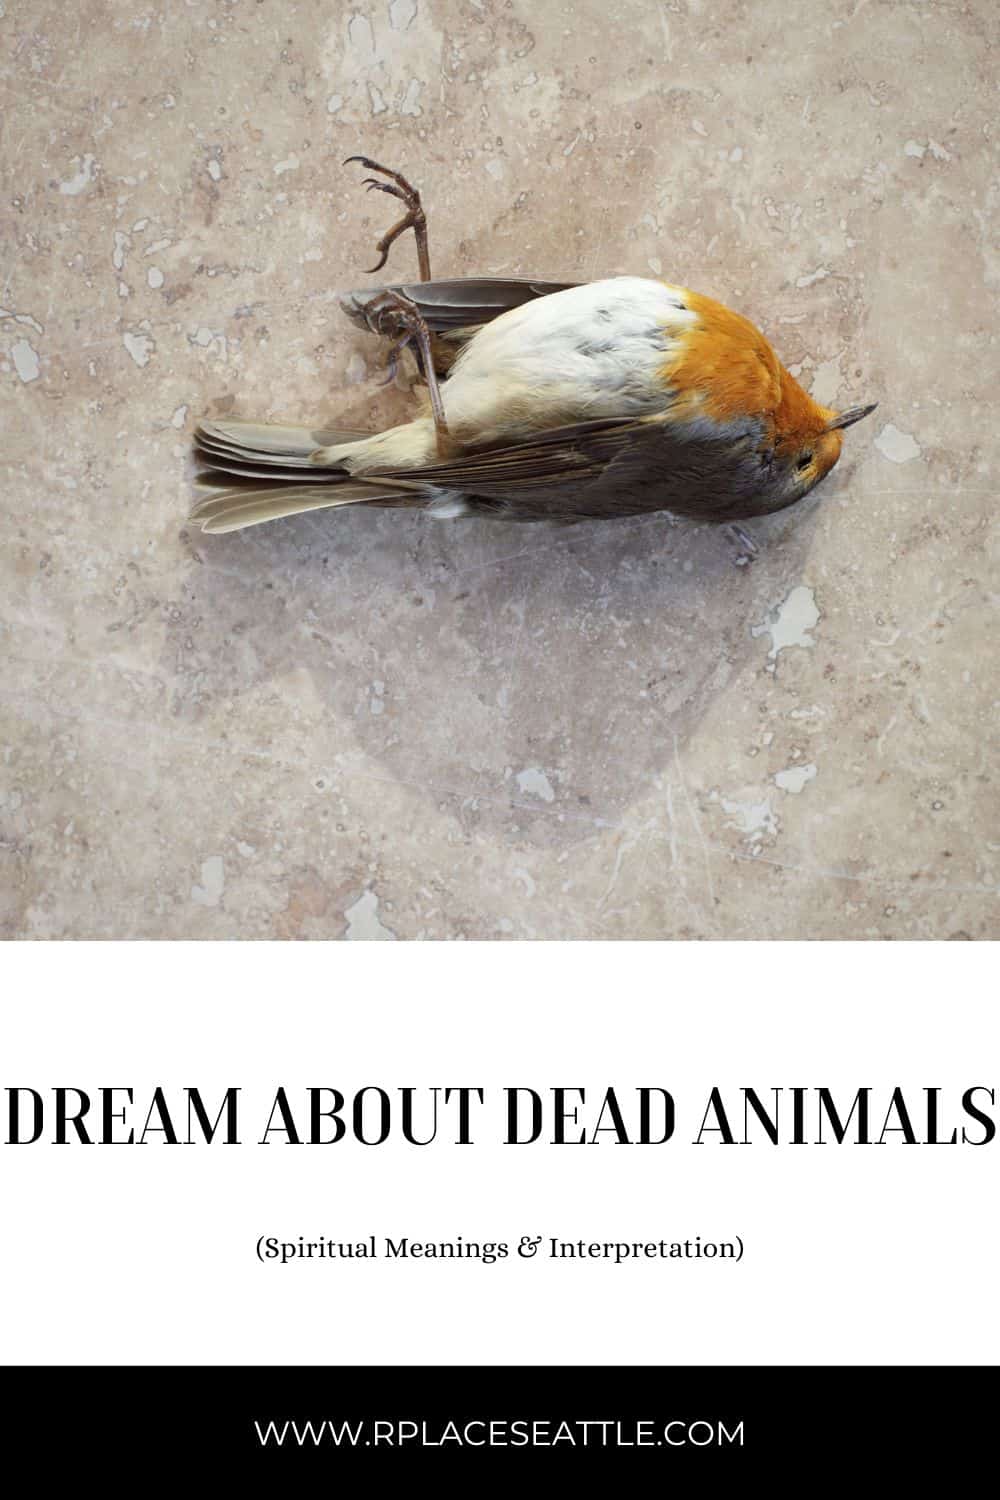 Dreaming About Dead Animals (Spiritual Meanings & Interpretation)